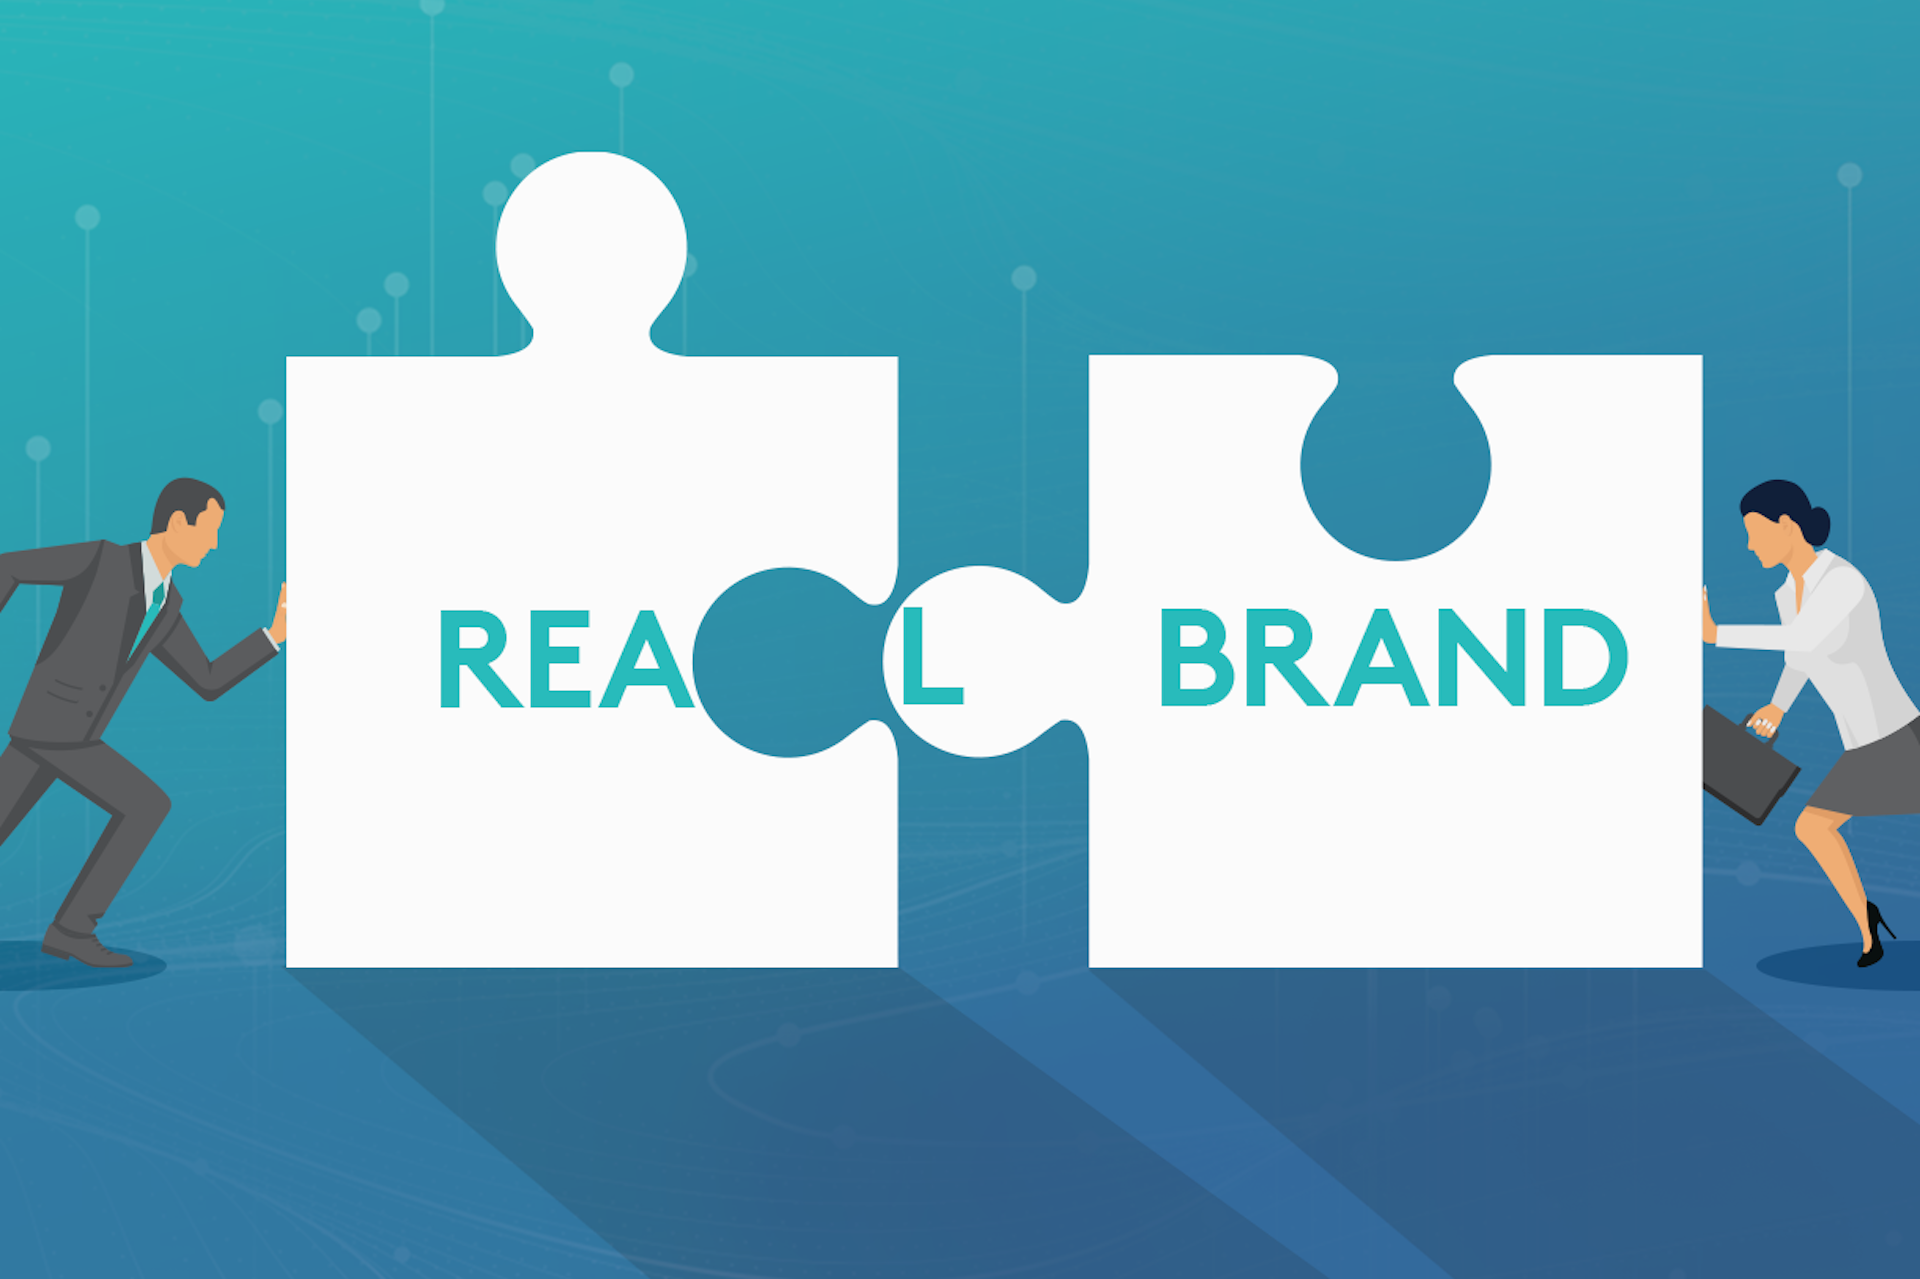 Being on Brand or being real? What's better for social media?